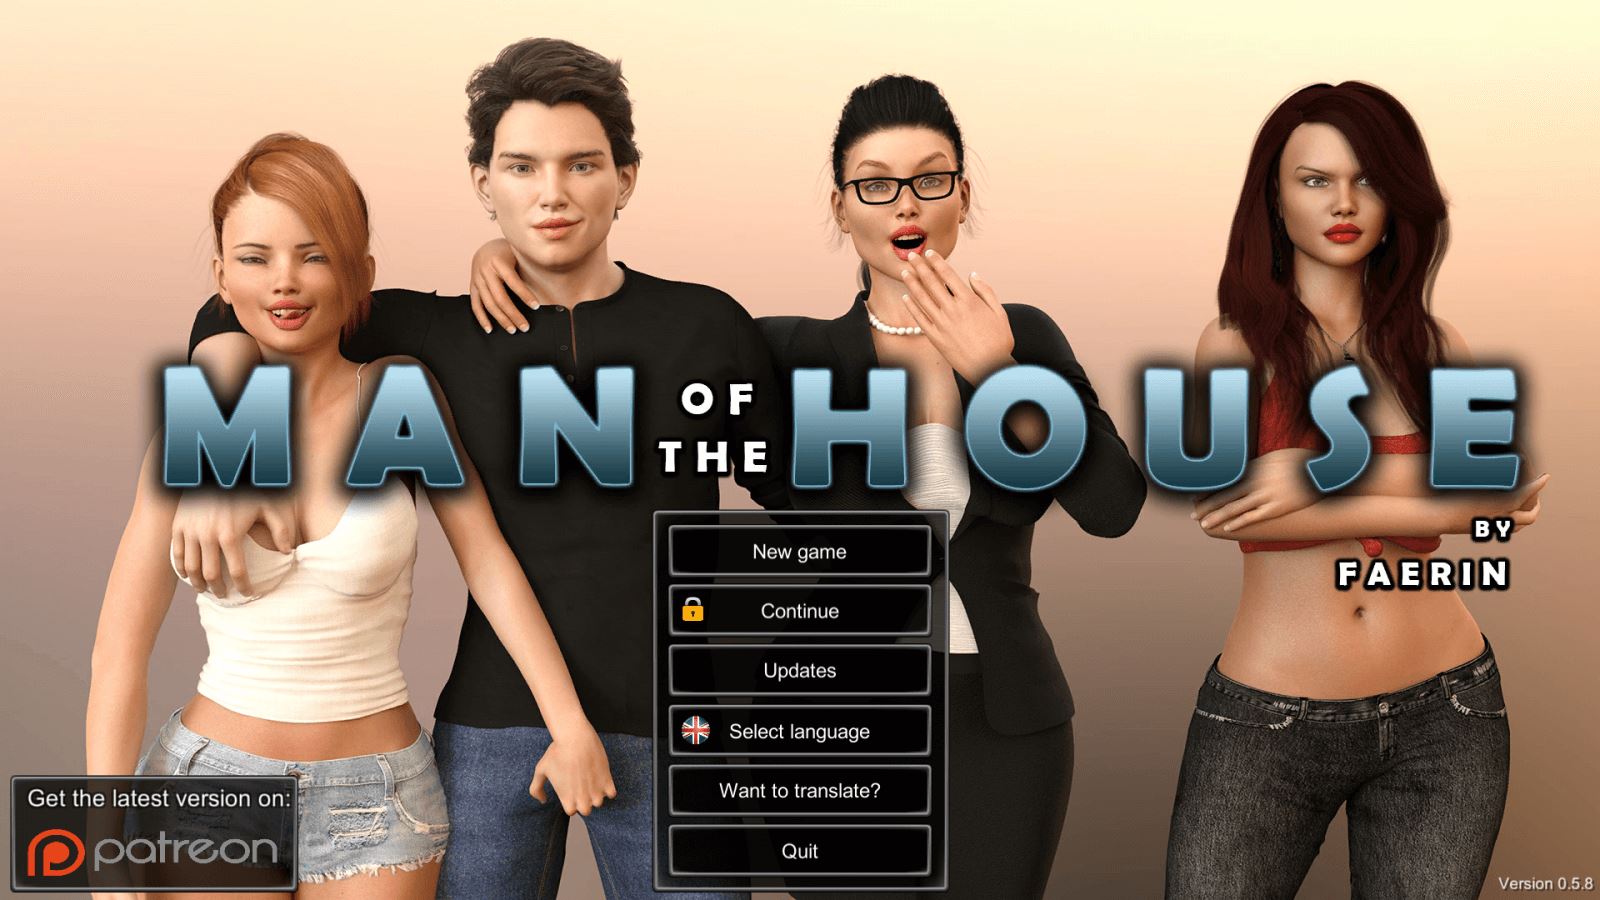 Xxx Men Fors - Man of the House Unity Porn Sex Game v.1.0.2c Extra Download for Windows